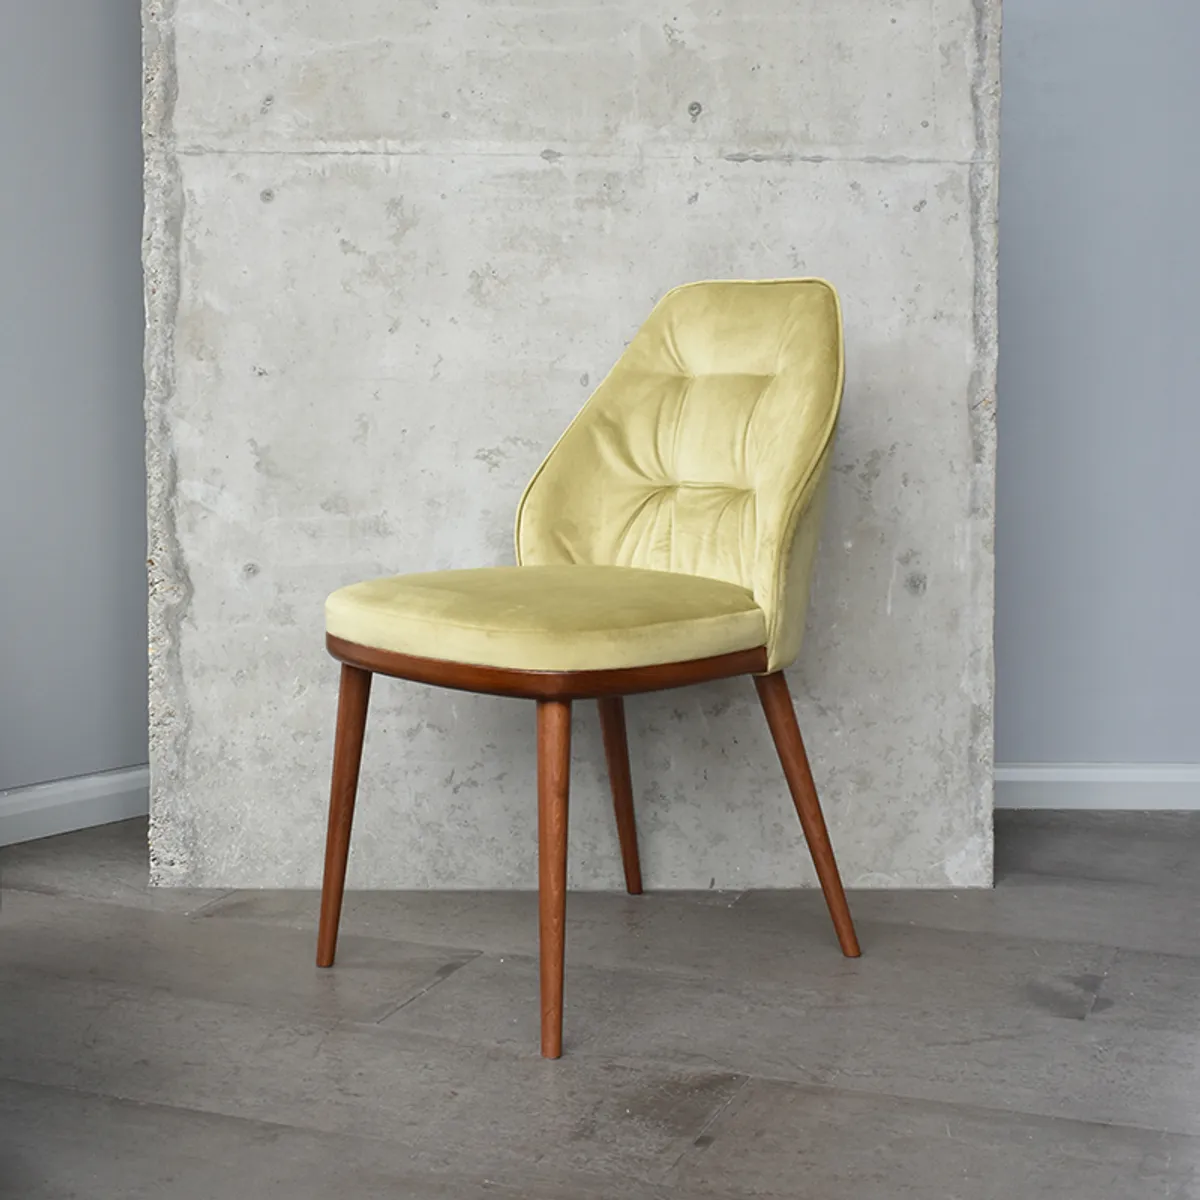 Cremant Side Chair New Furniture From Milan 2019 By Inside Out Contracts 020